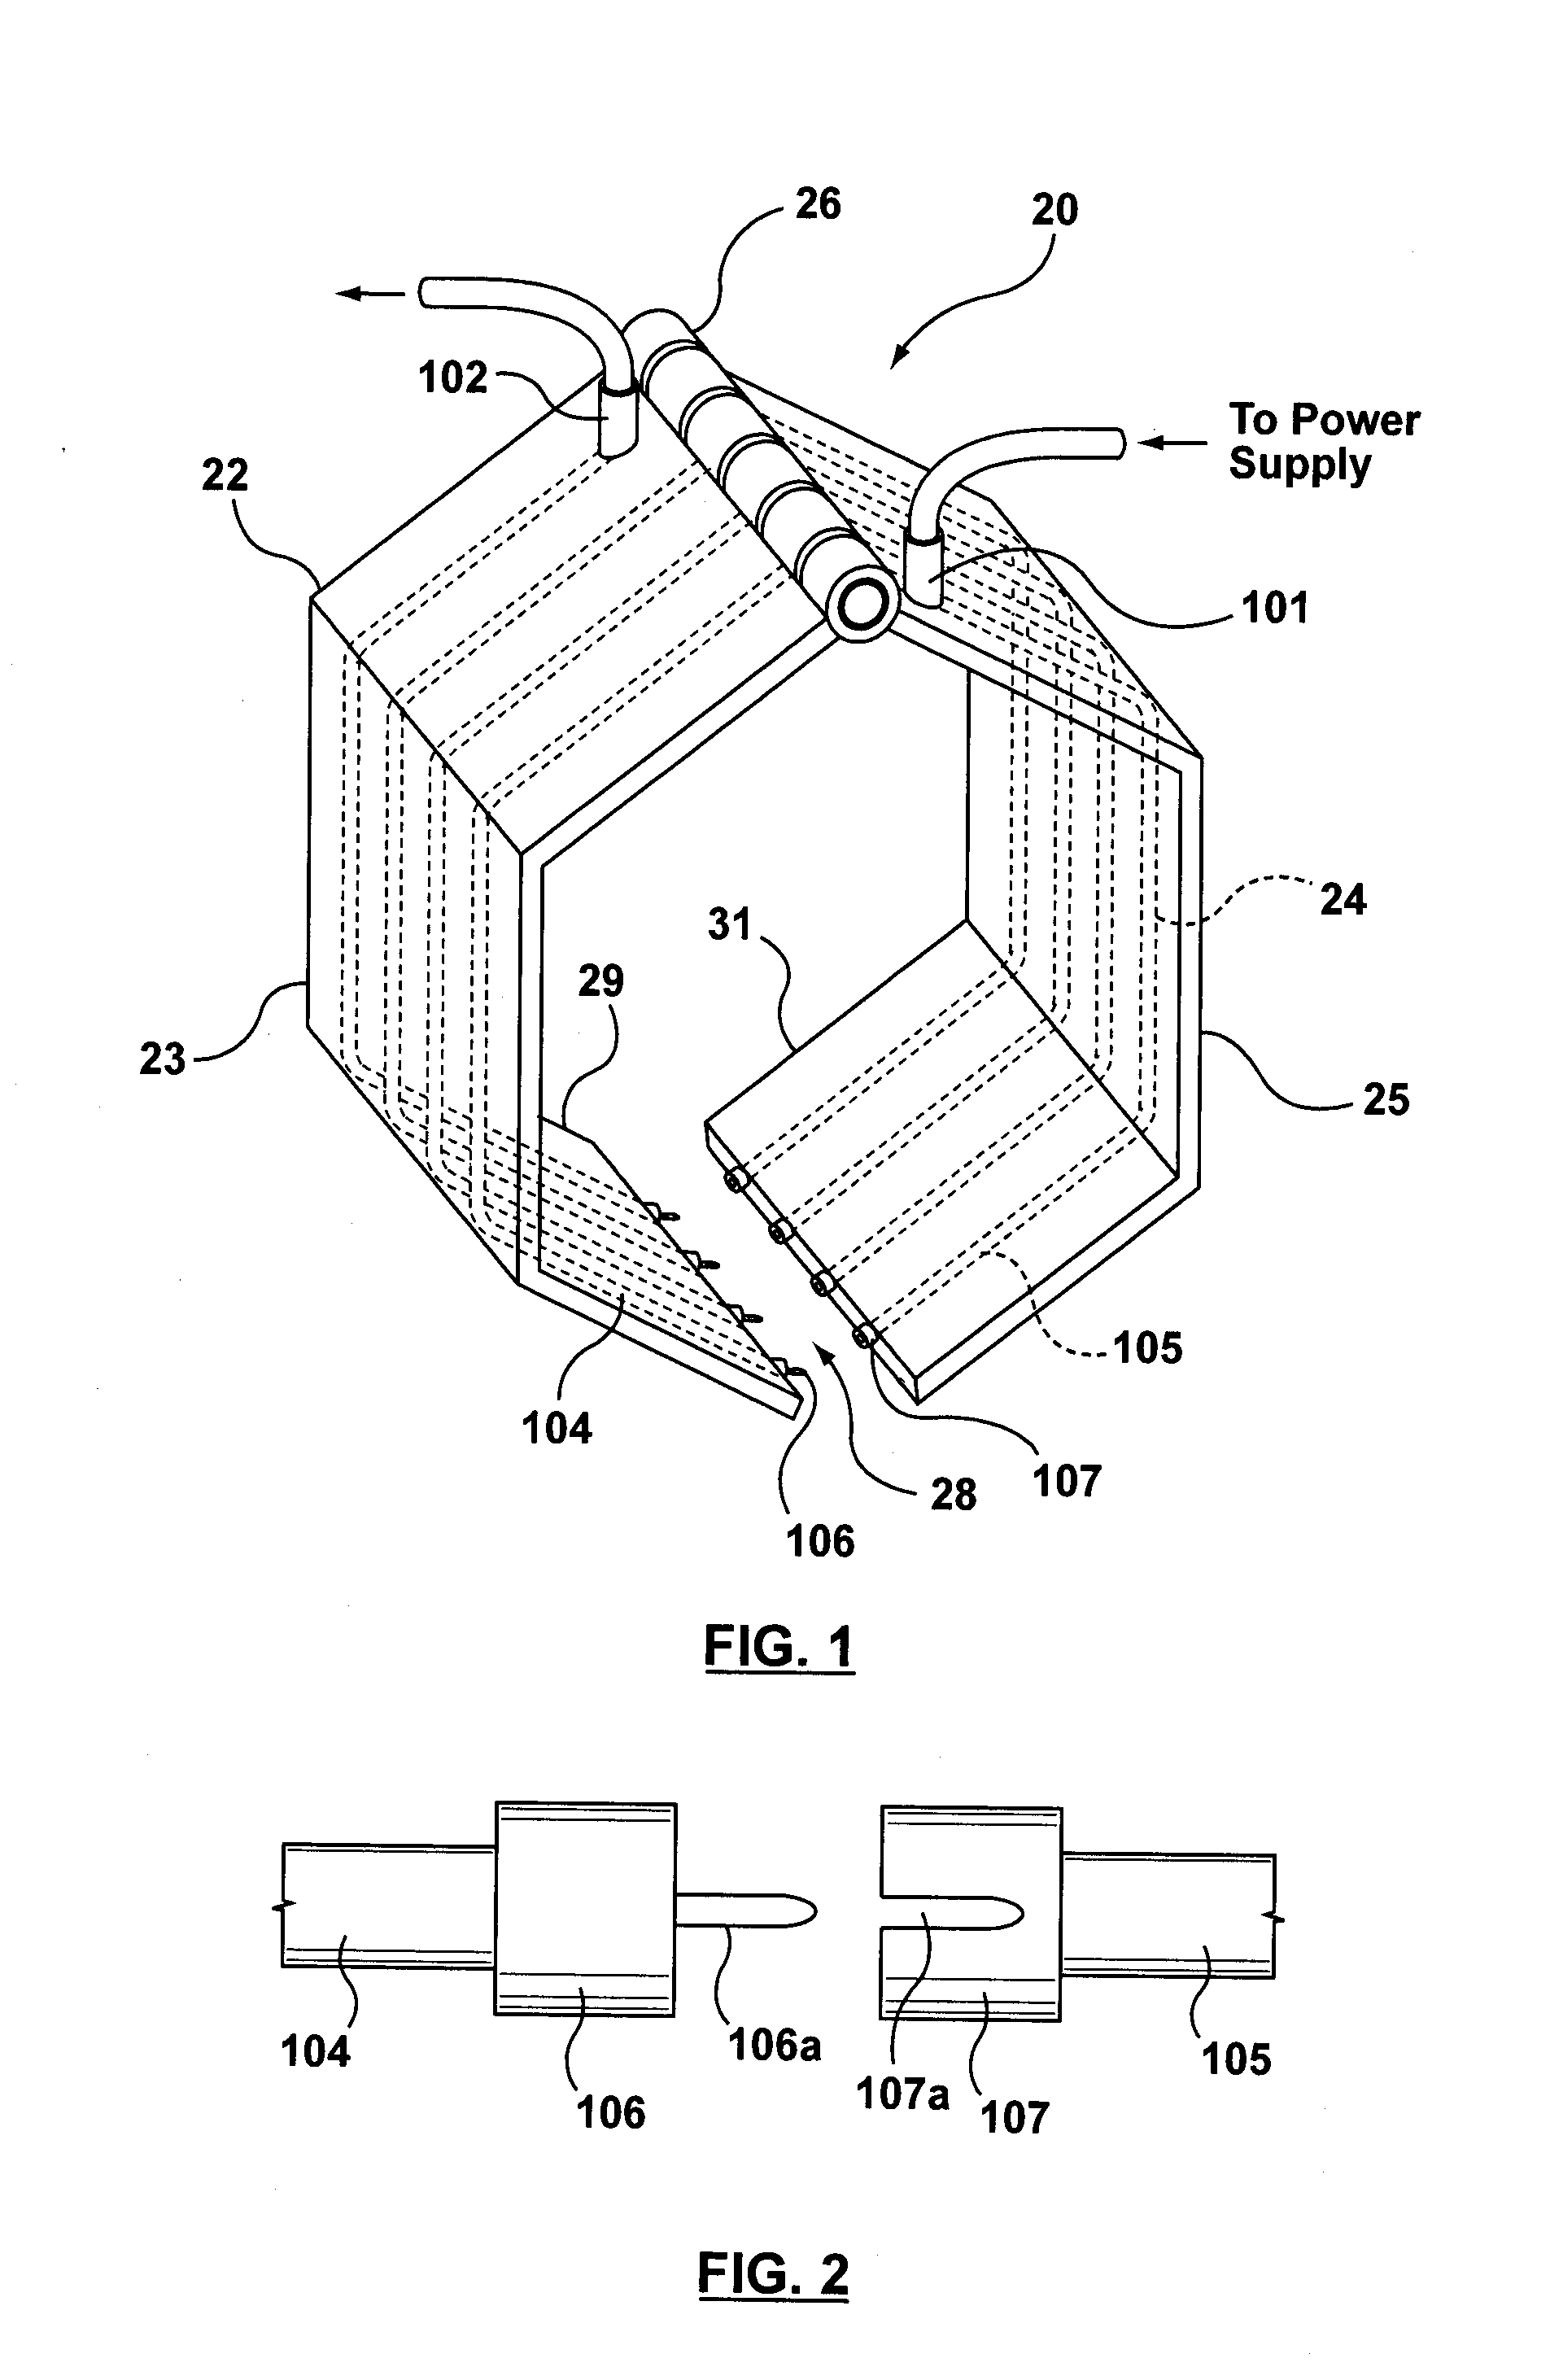 Induction heating apparatus for pipeline connections